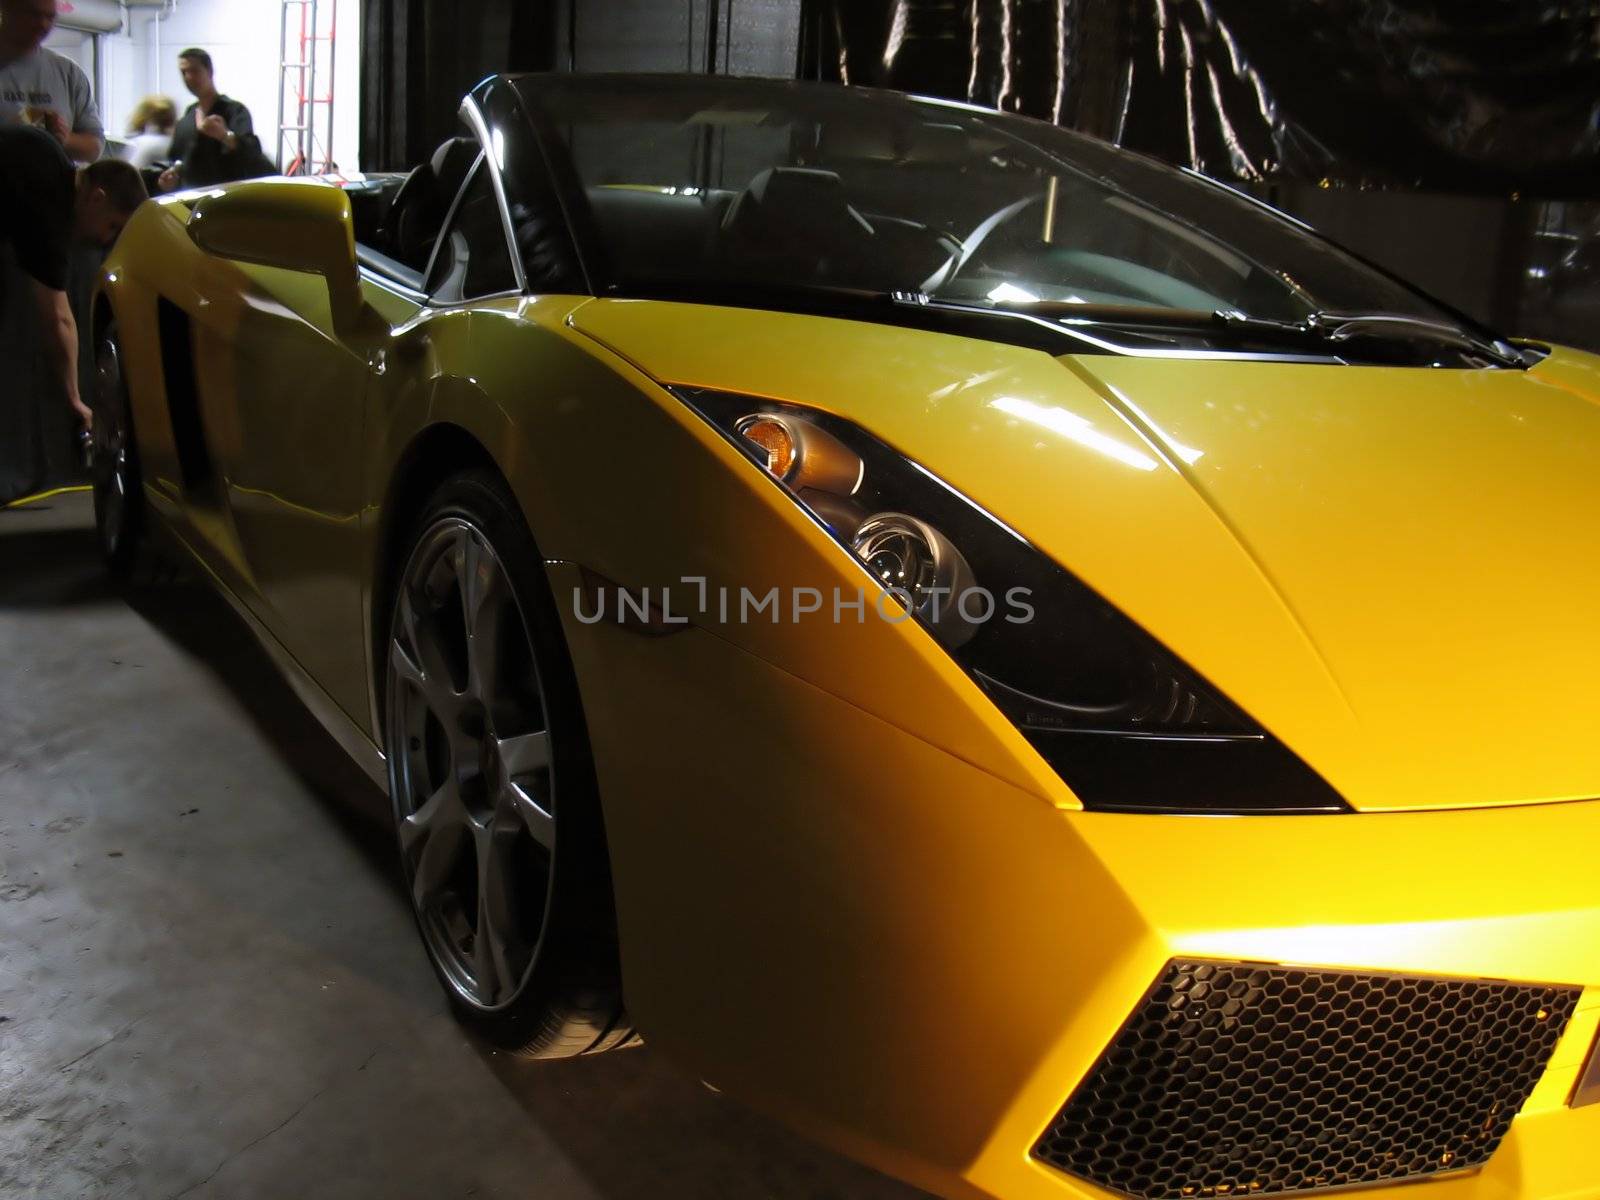 An exotic yellow sports car.